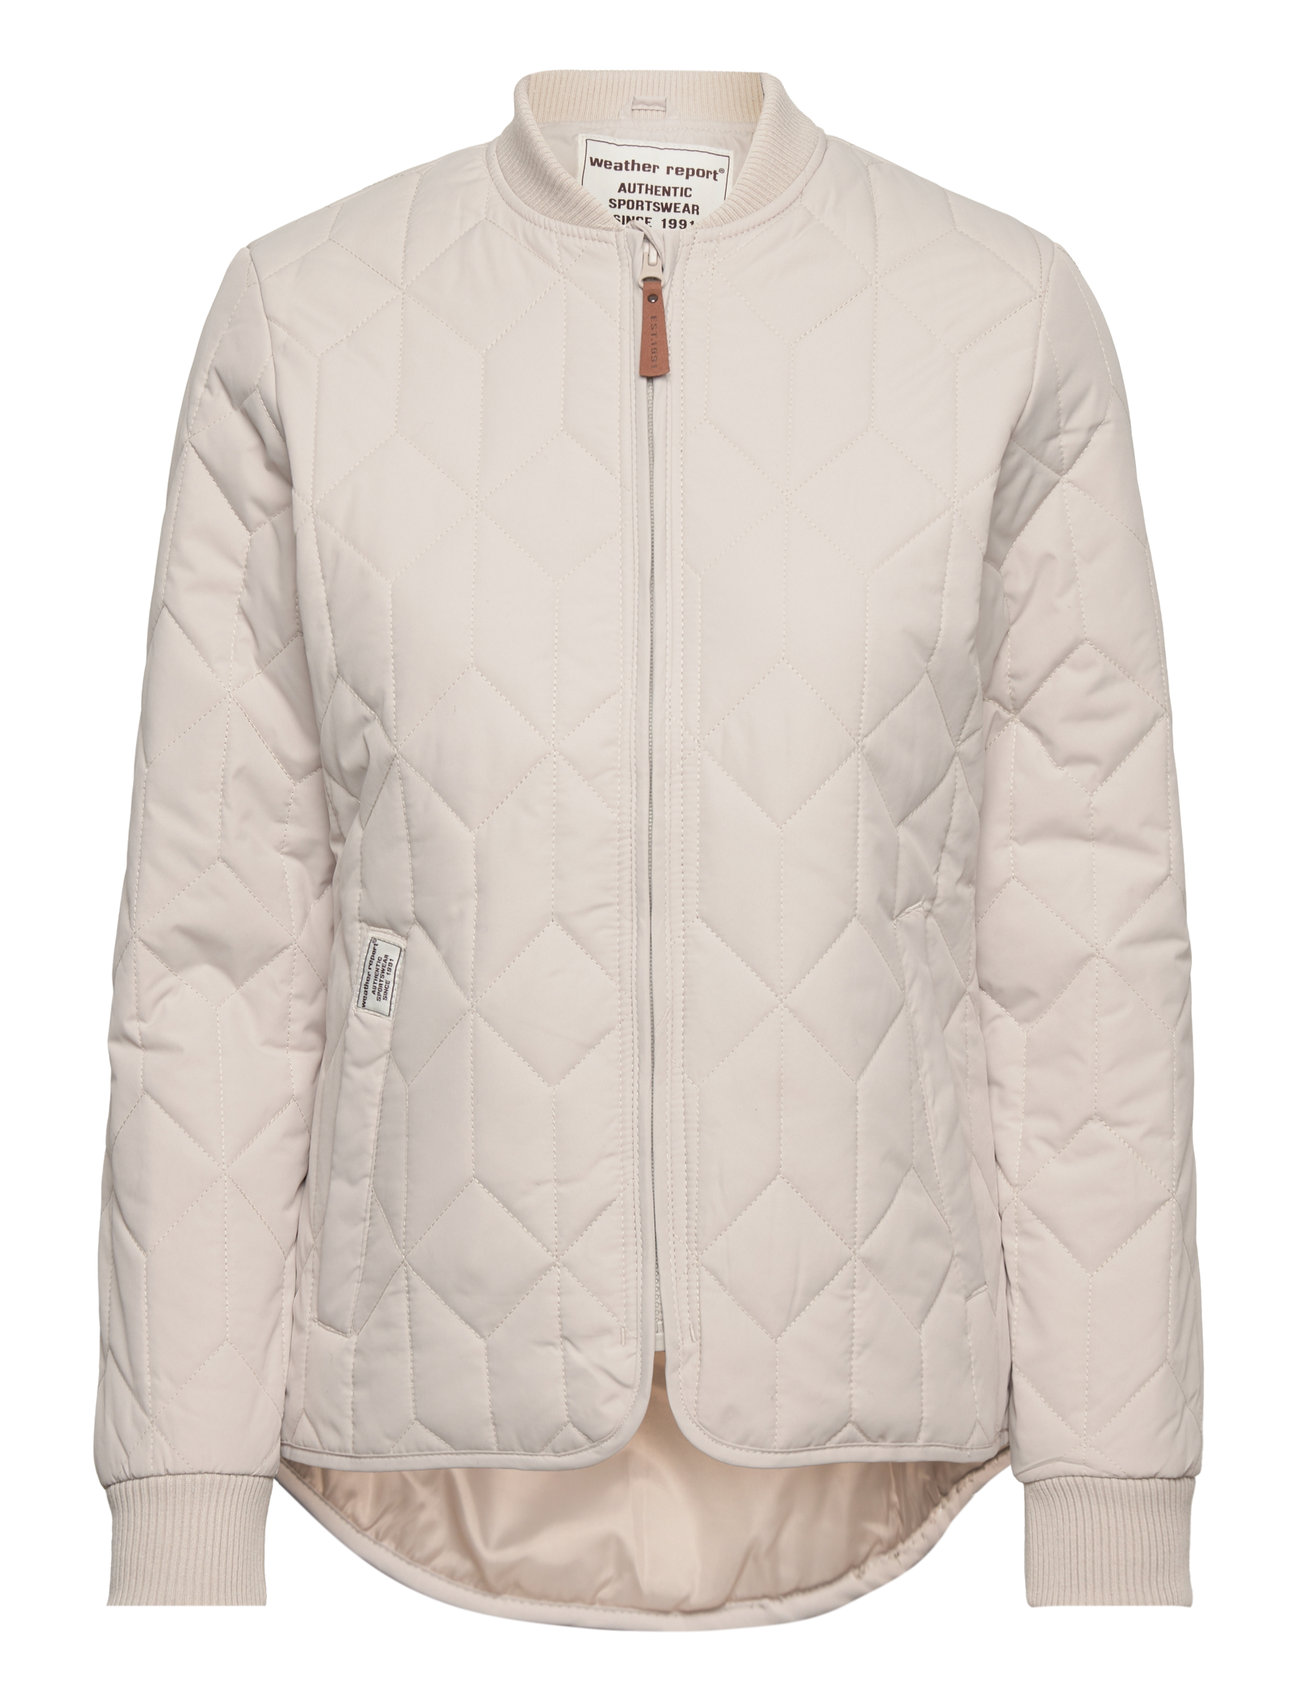 - Piper Quilted W Report Weather from Quilted delivery easy online Boozt.com. Buy Fast Jacket €. returns jackets at and Report Weather 39.96